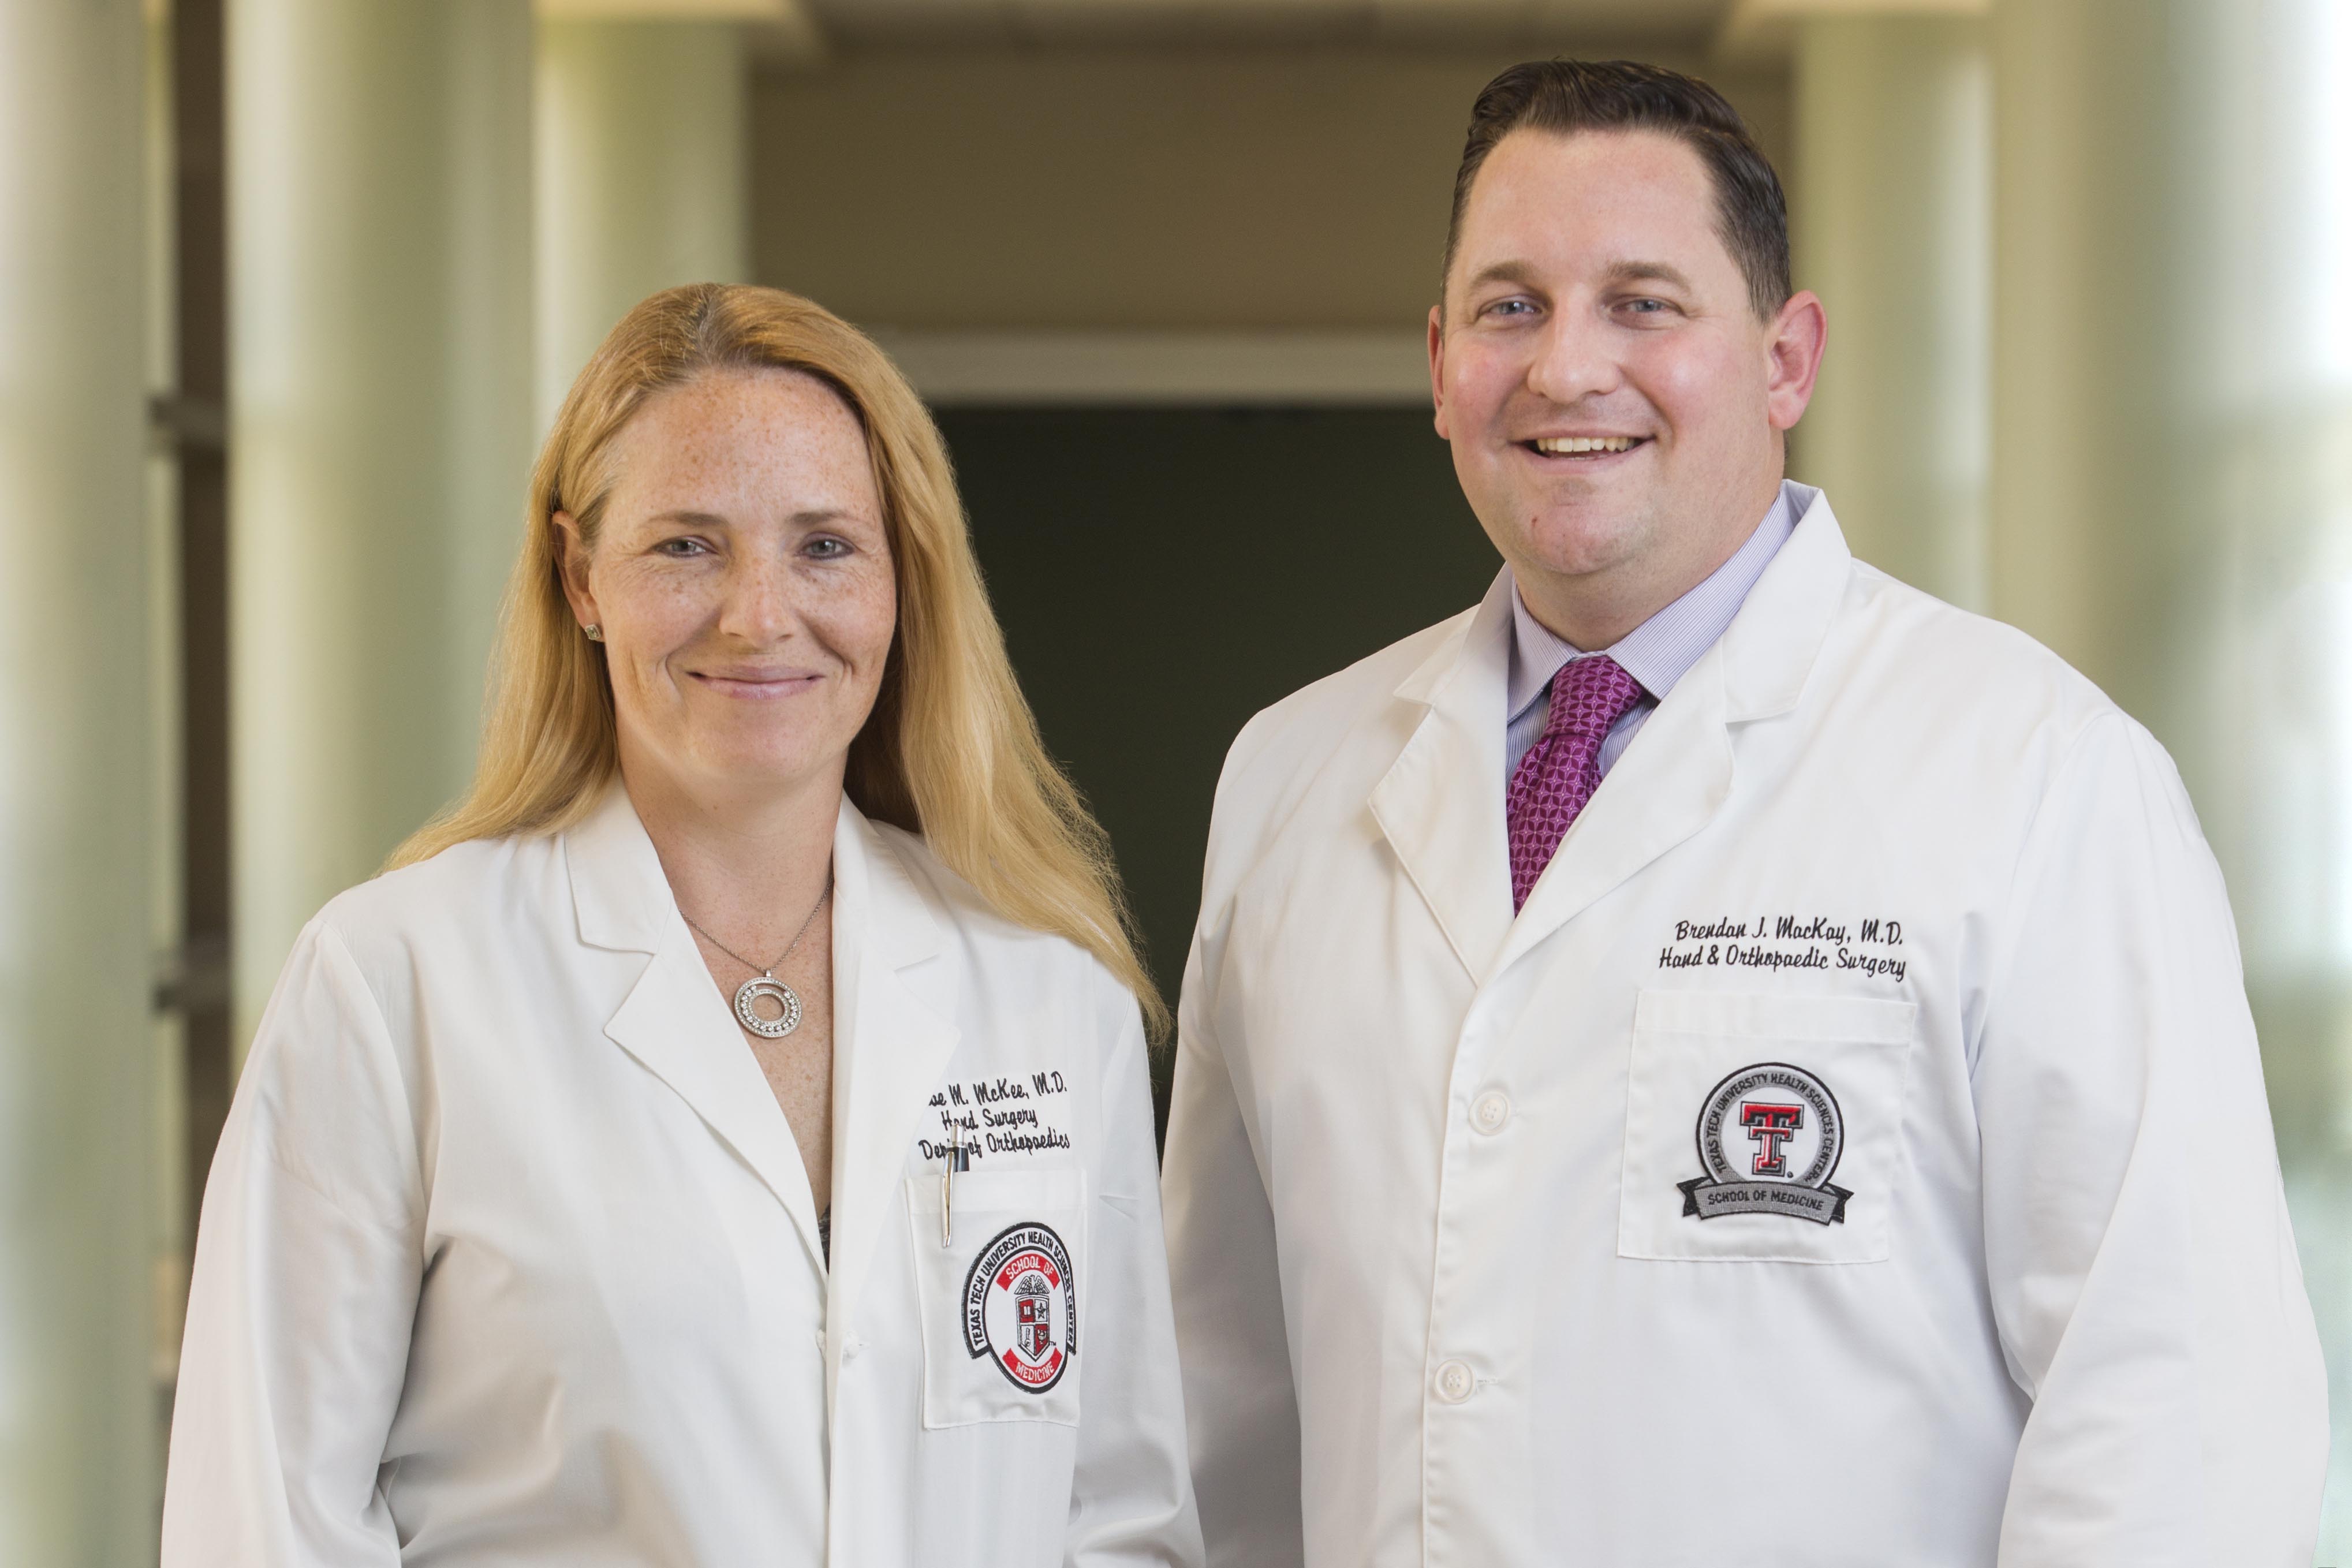 Dr. McKee and Dr. MacKay, hand specialists at the Texas Tech University Health Sciences Center